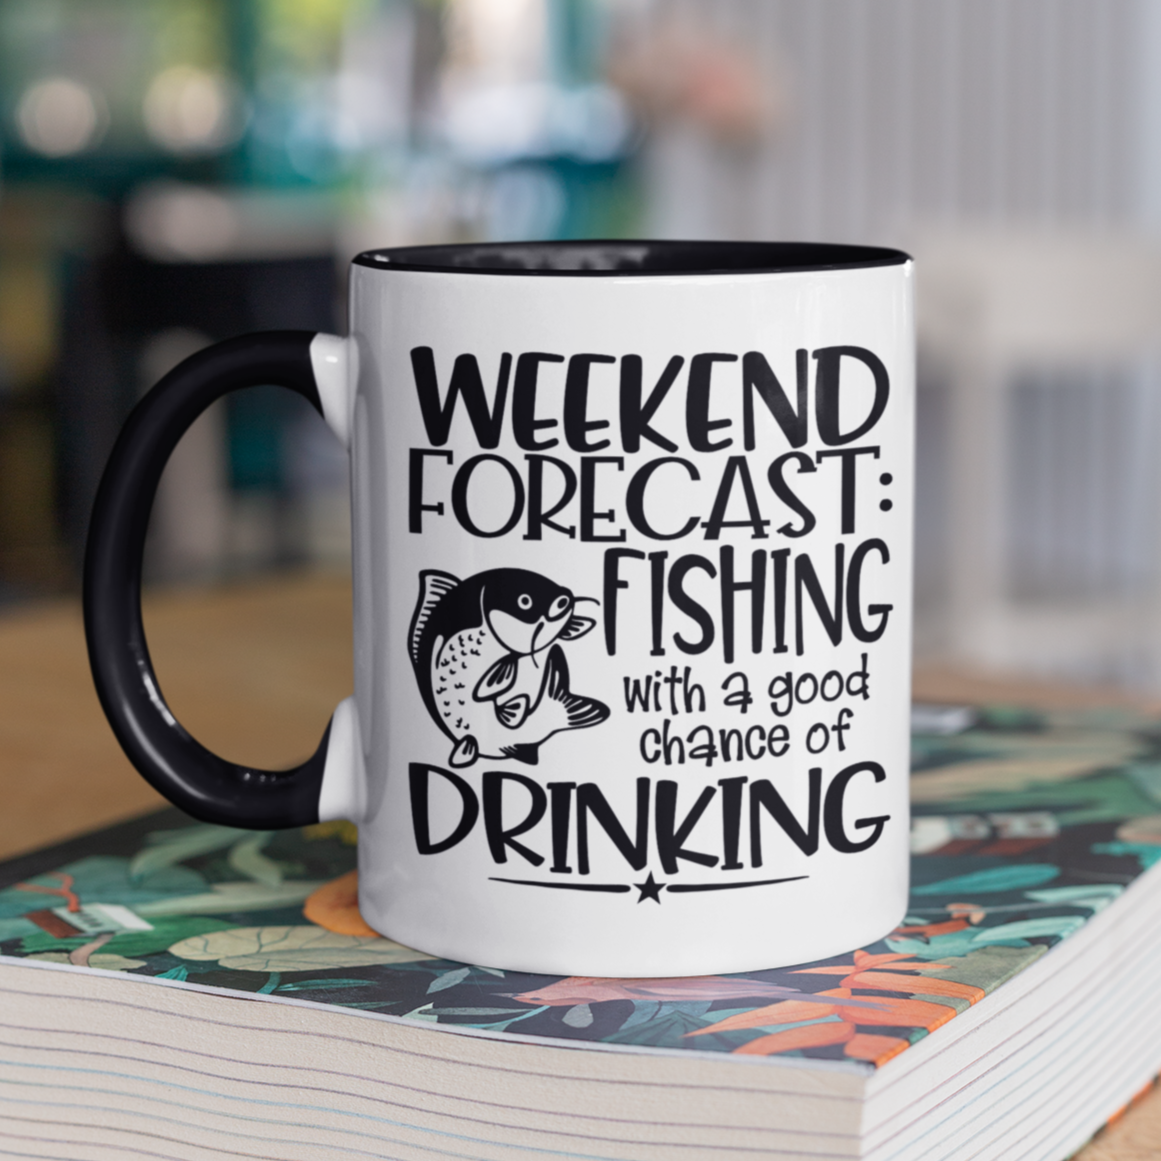 weekend-forecast-fishing-with-a-good-chance-of-drinking-glossy-mockup-of-a-two-toned-11-oz-coffee-mug-mockup-on-a-table